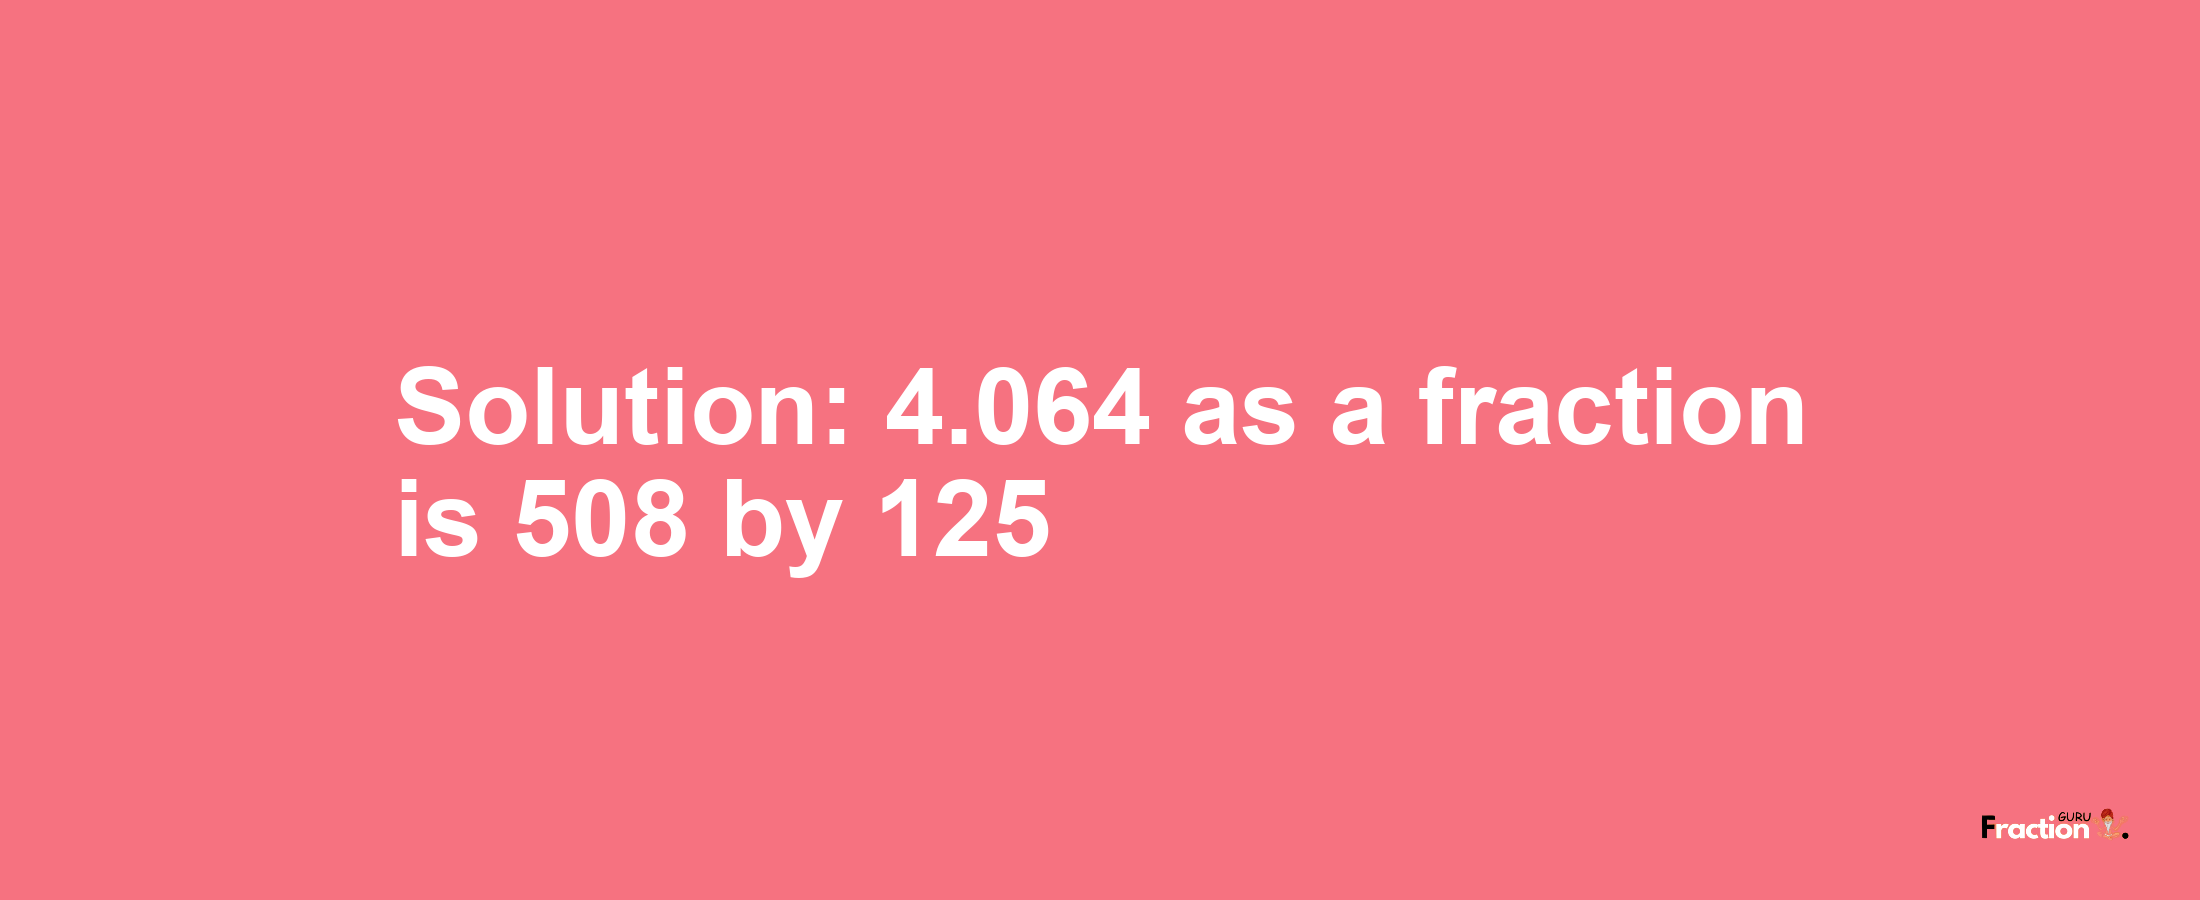 Solution:4.064 as a fraction is 508/125